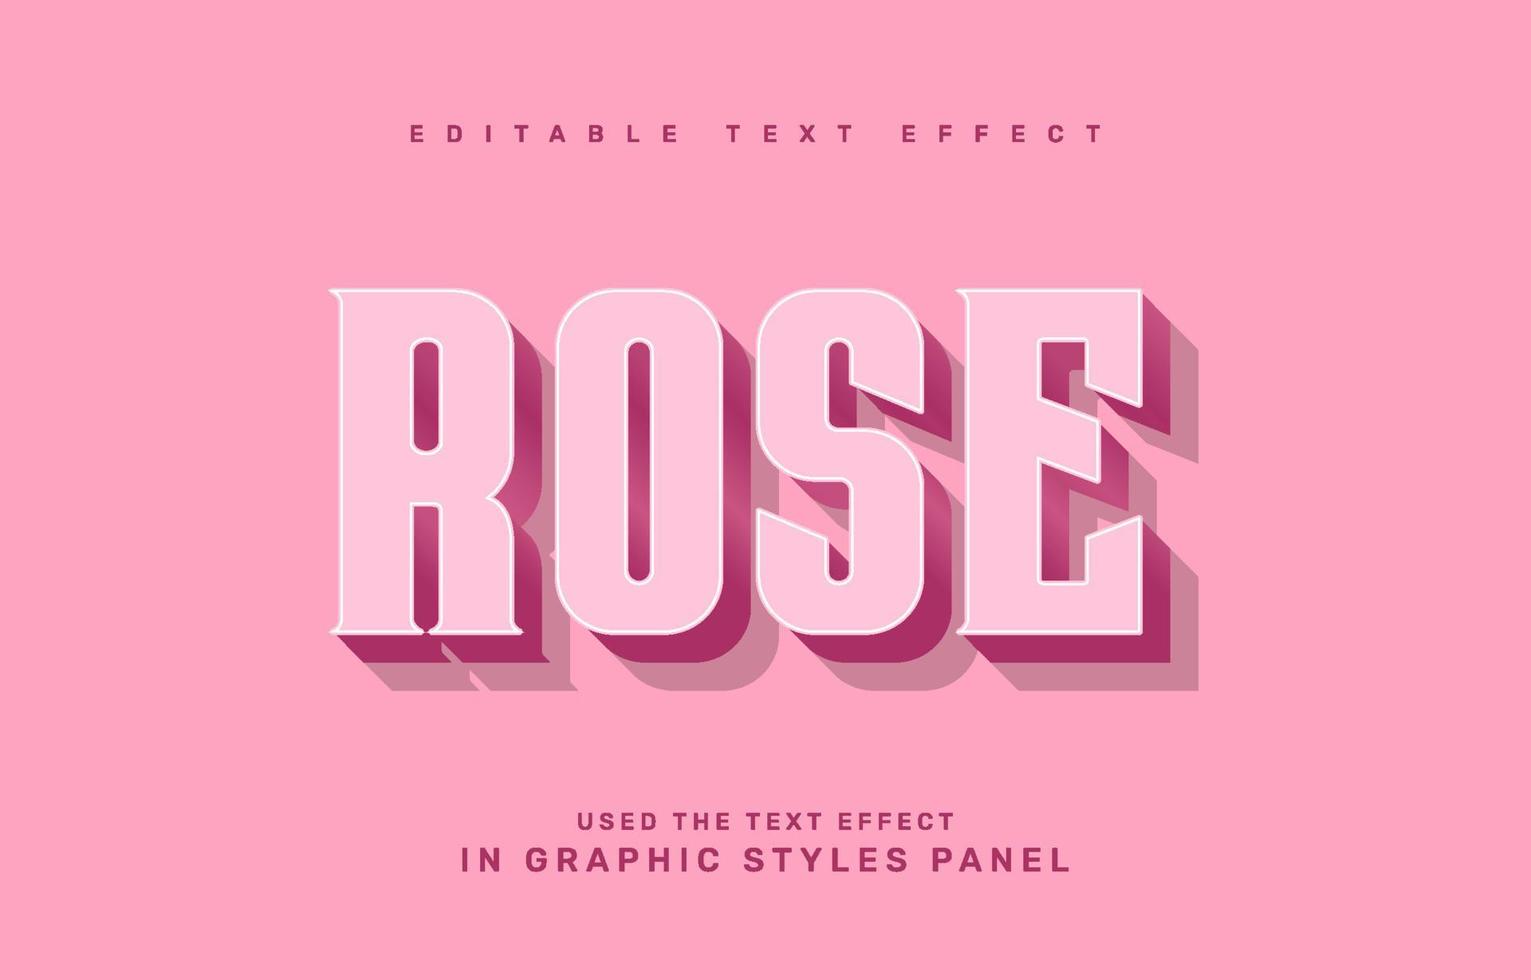 Pink rose editable text effect template vector